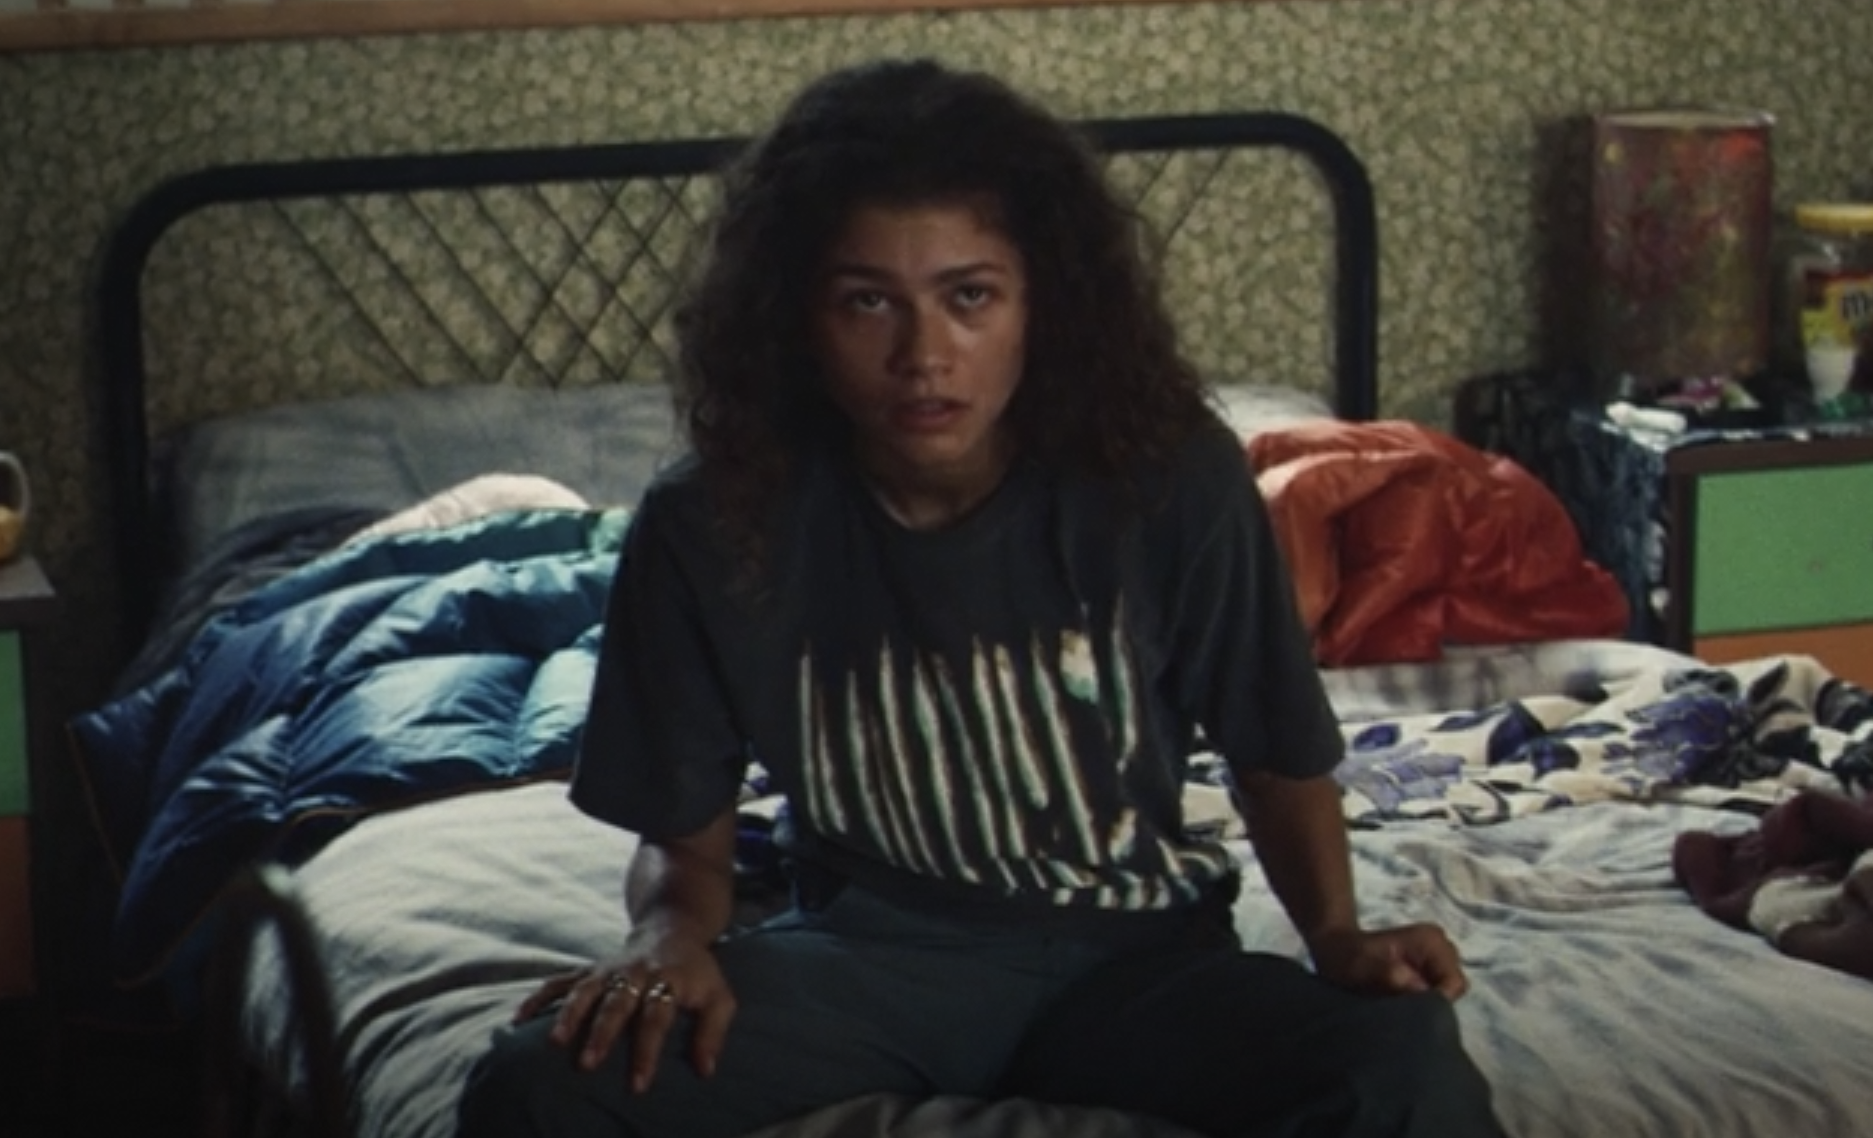 Euphoria” Outfits from Season 2 Graded by Style, Price Point